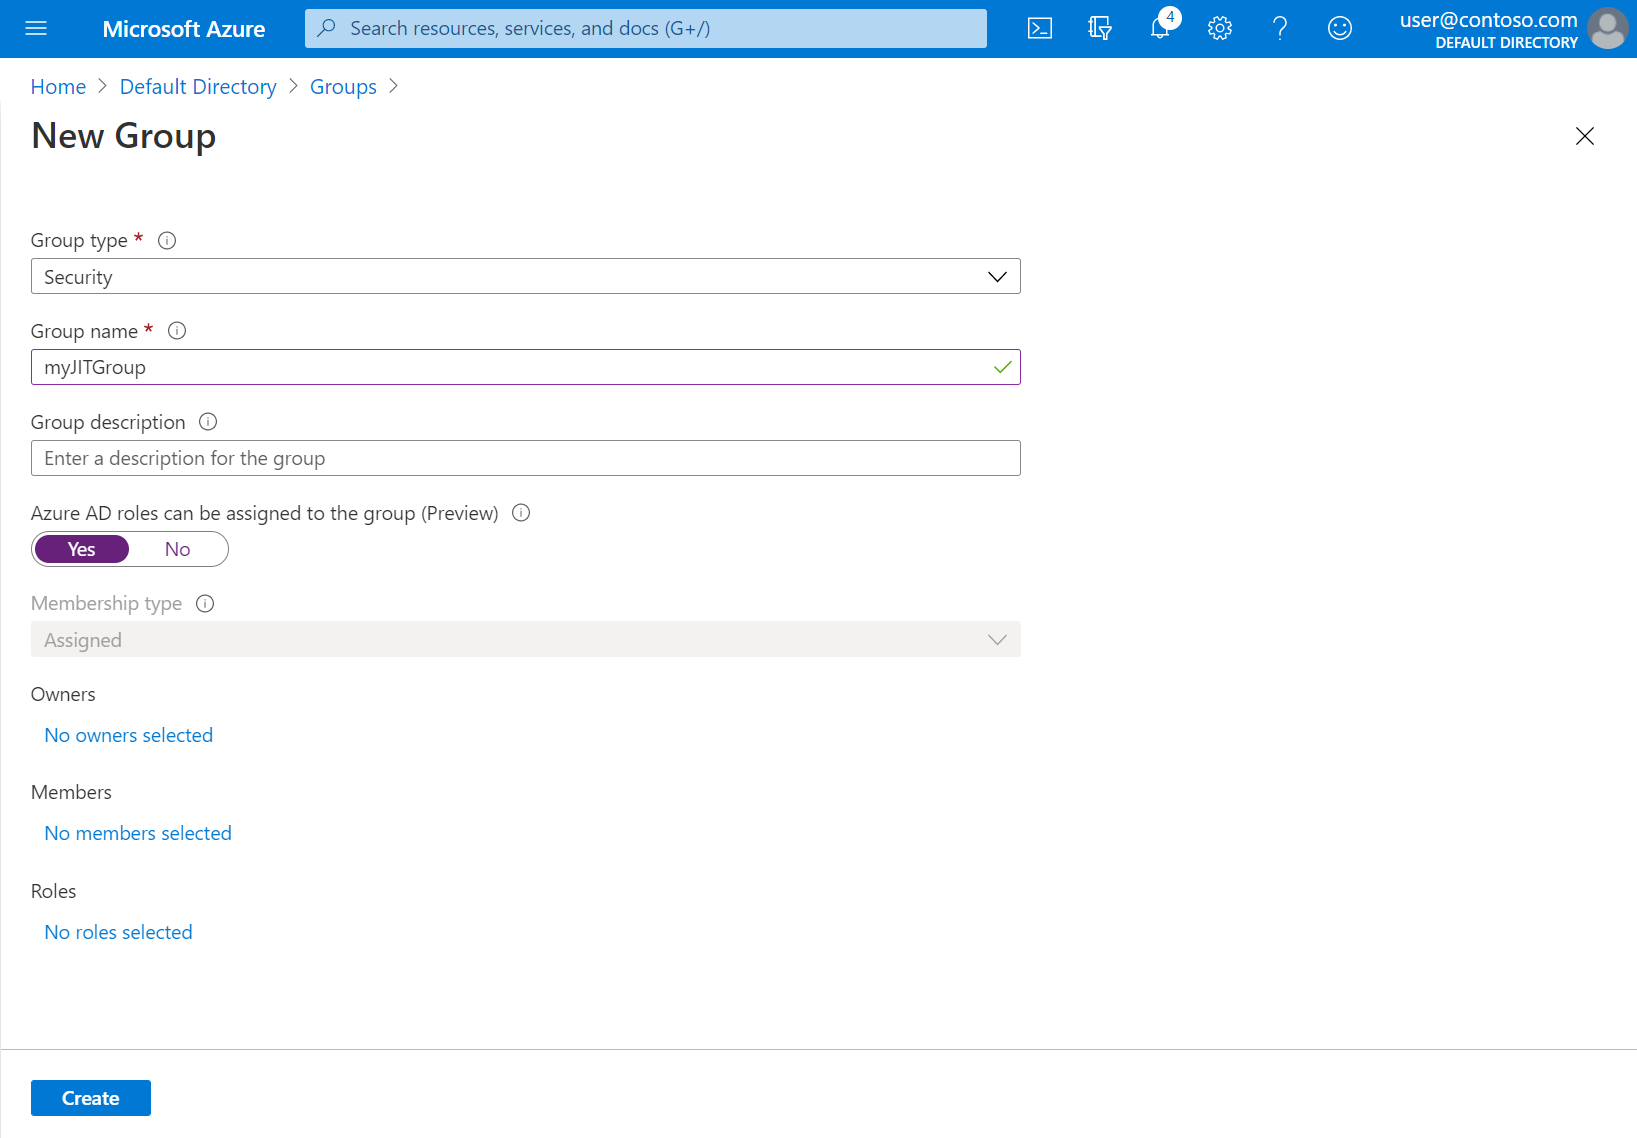 Screenshot showing details for the new group in the Azure portal.